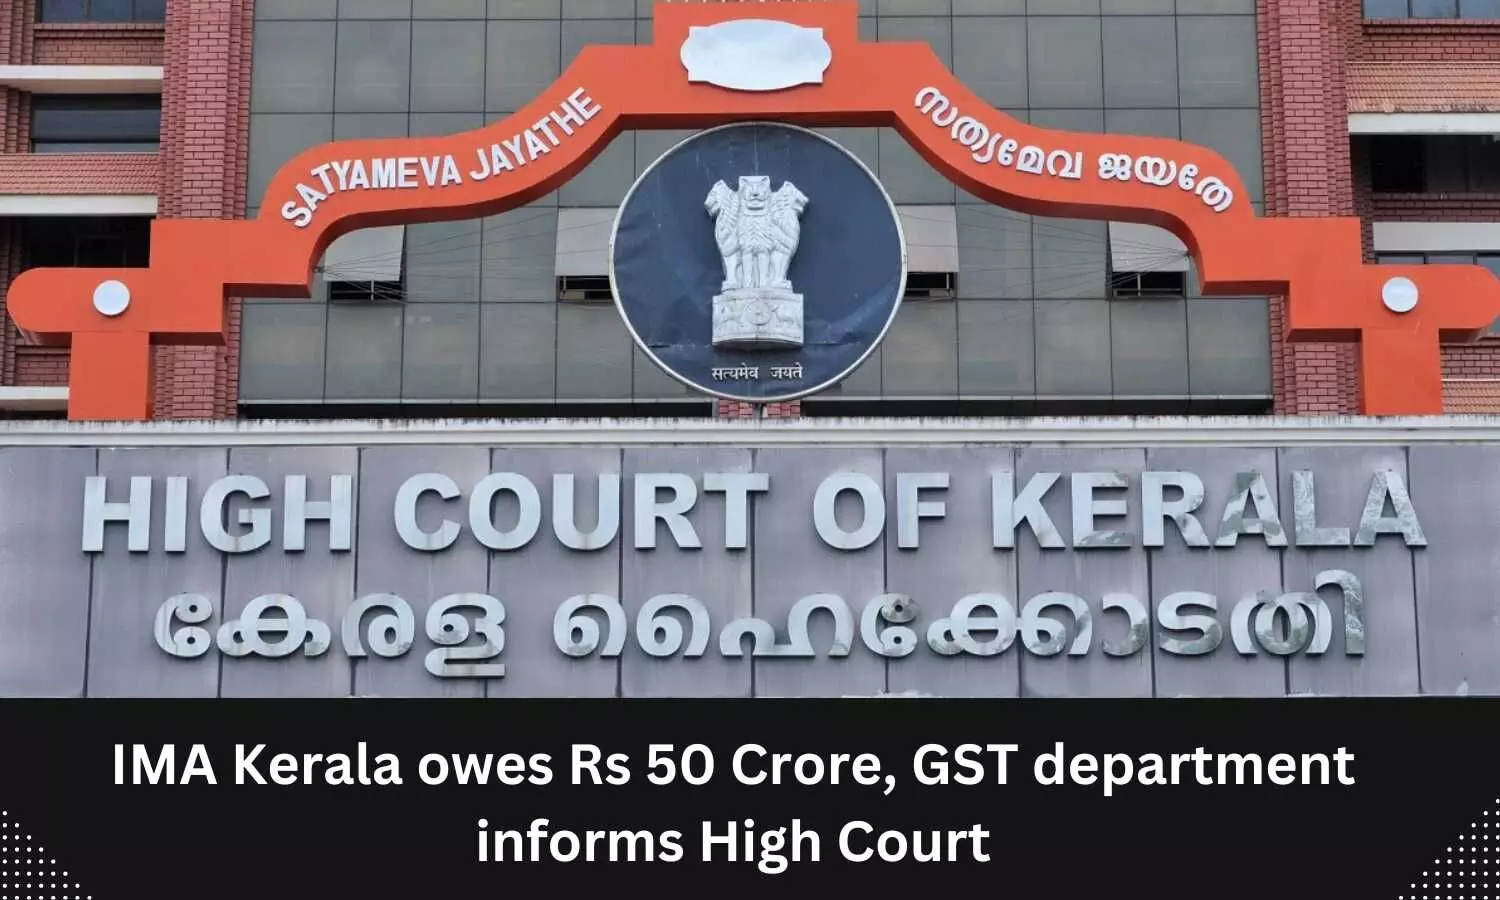 IMA Kerala owes Rs 50 Crore, GST department informs High Court